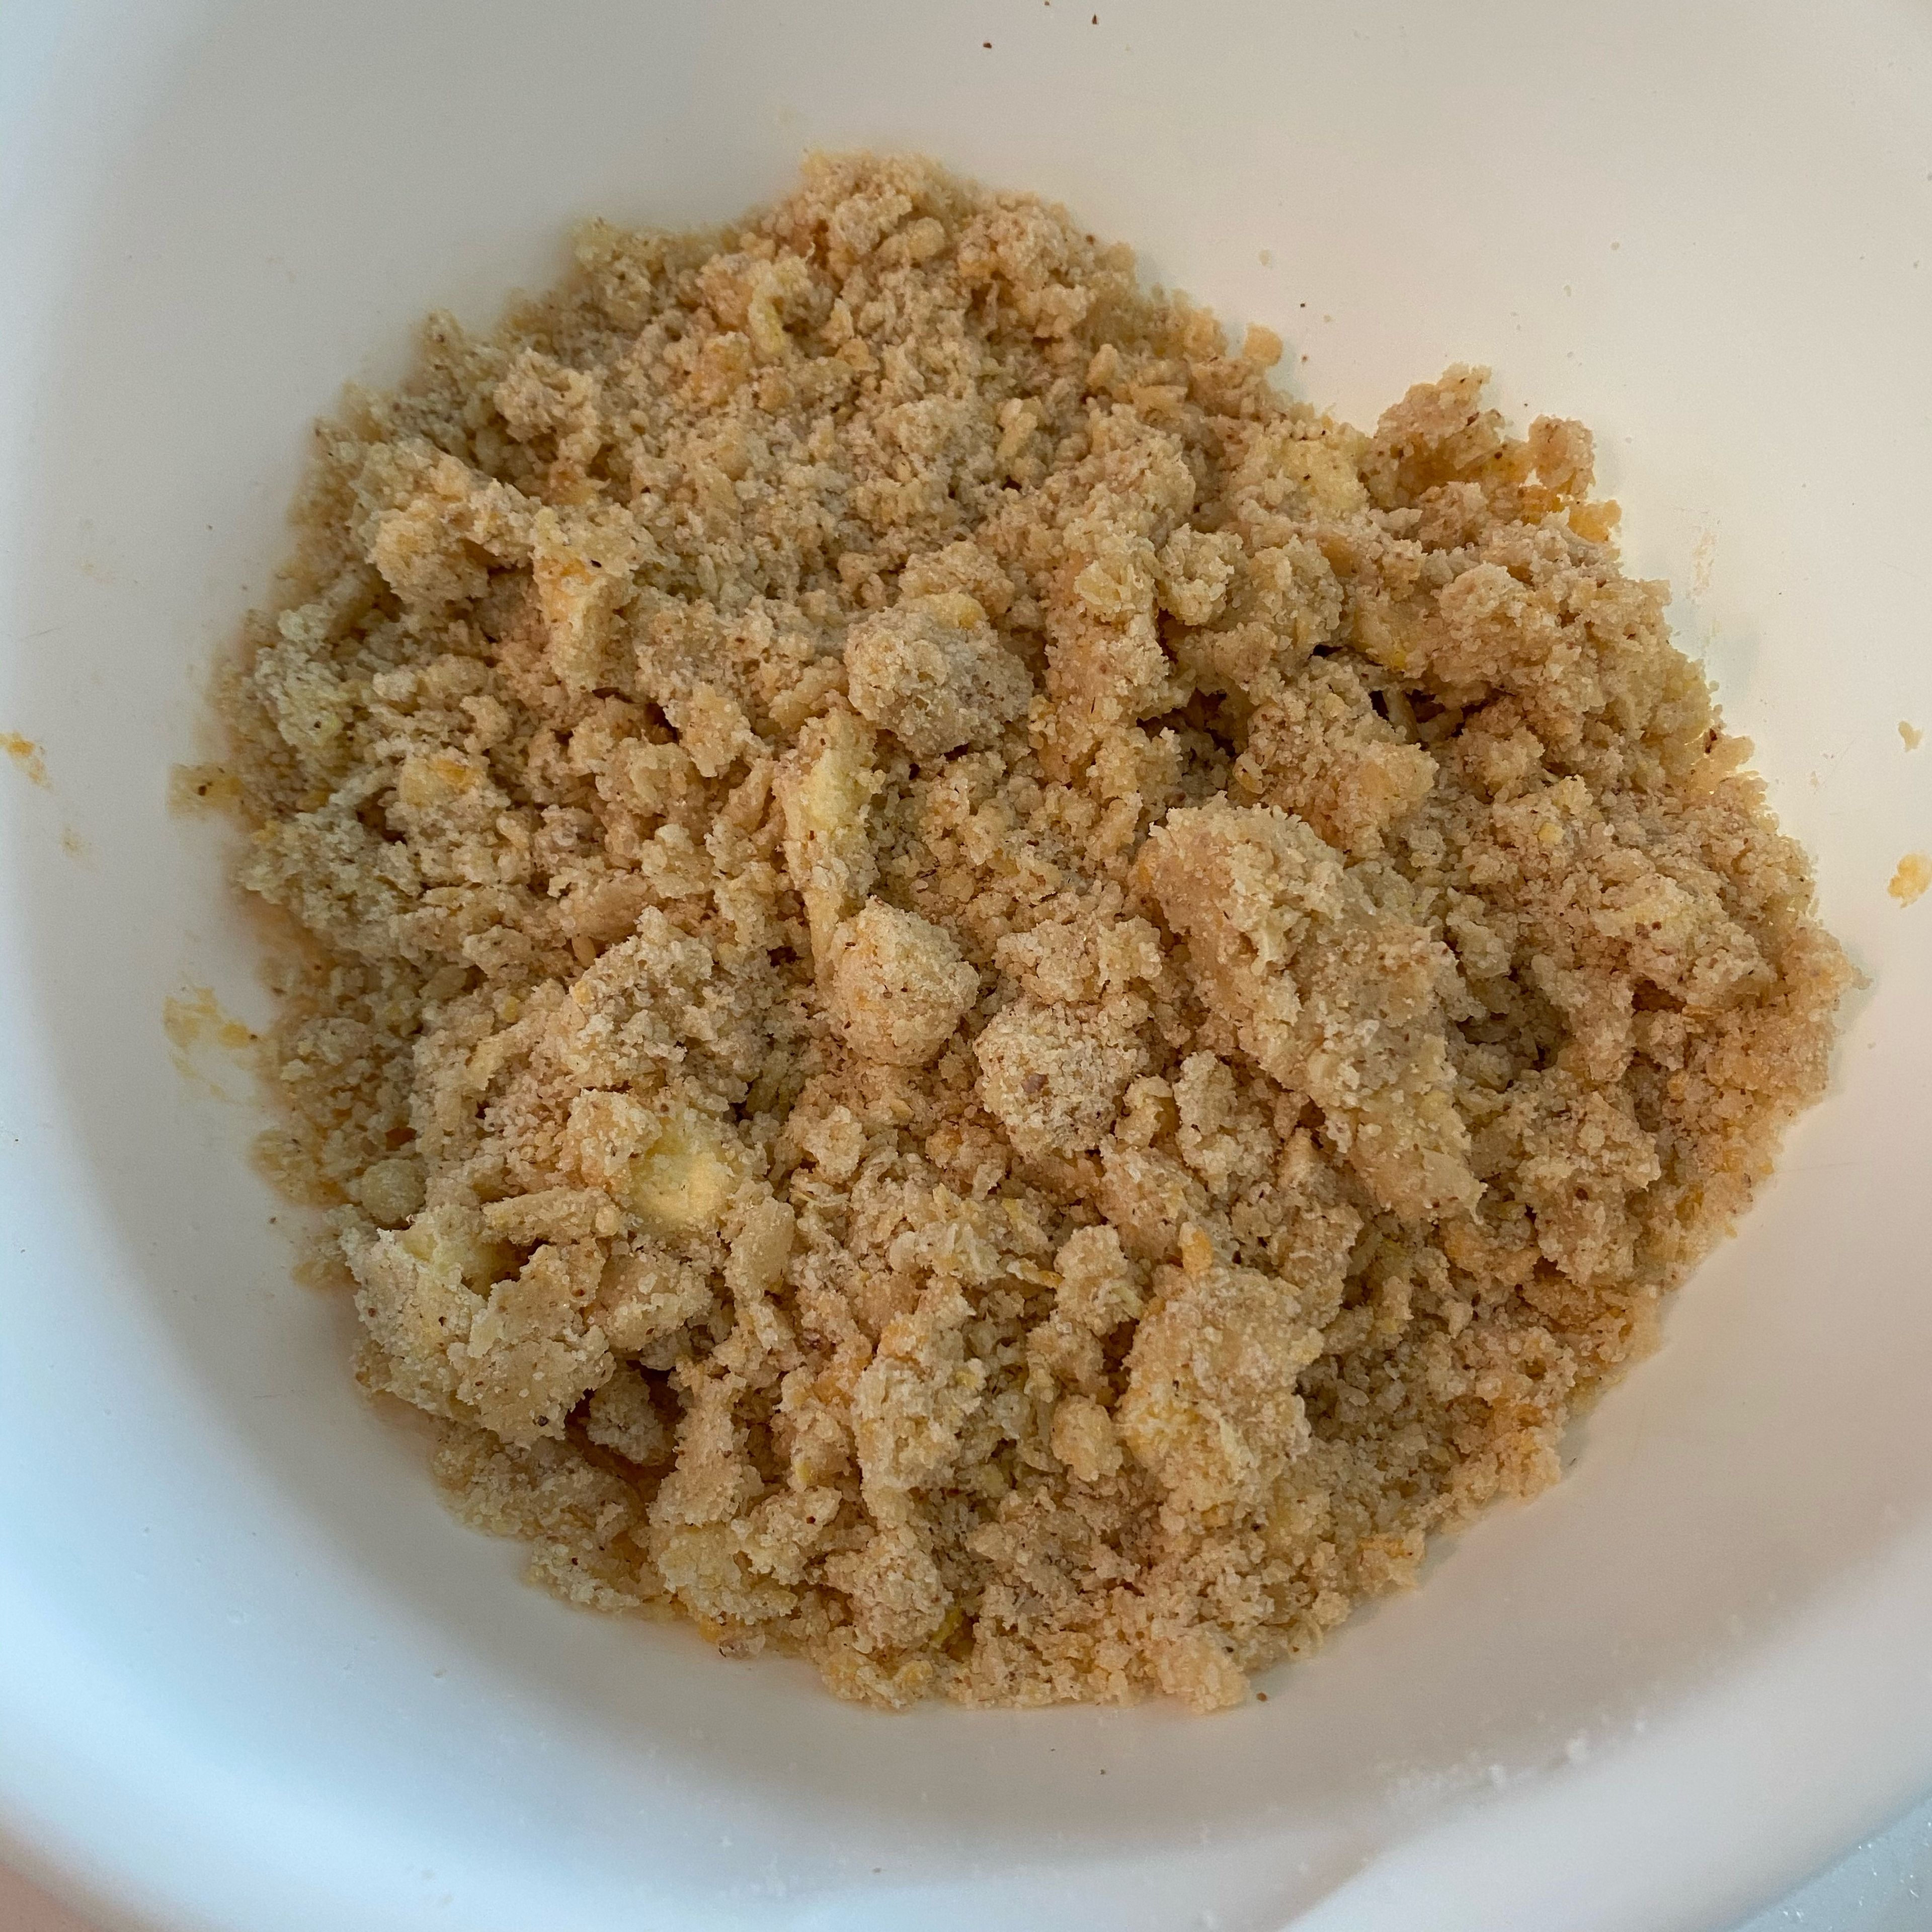 In a bowl mix together the ingredients of the quick pastry and crumble it with your hands then refrigerate for 15 minutes.